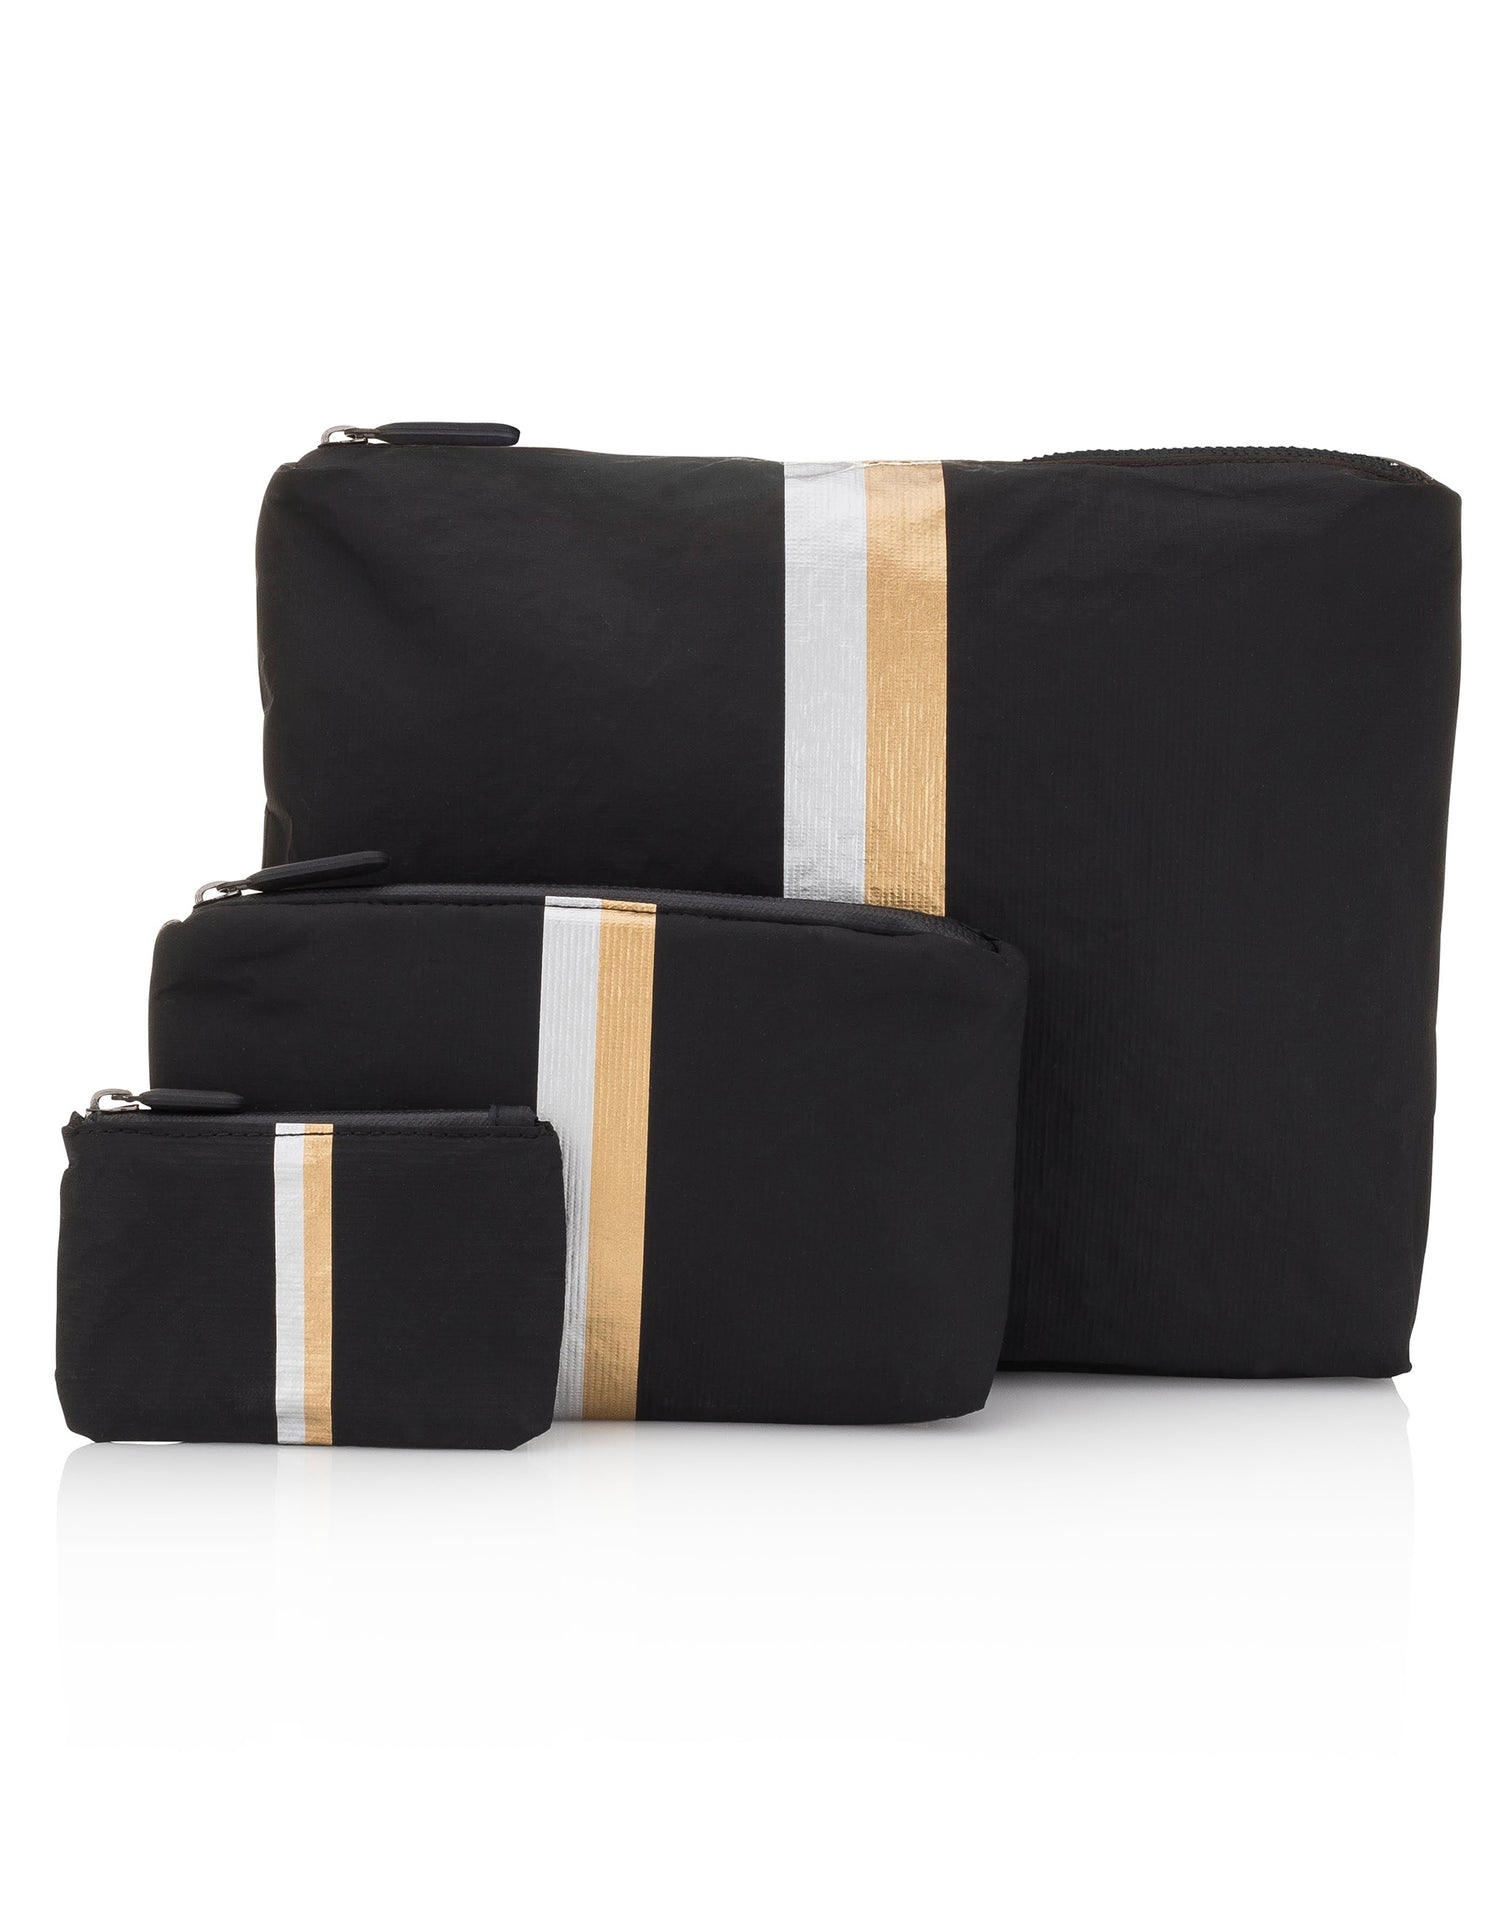 Hi Love's Stripe Set of Three Travel Pack in Black - Product View